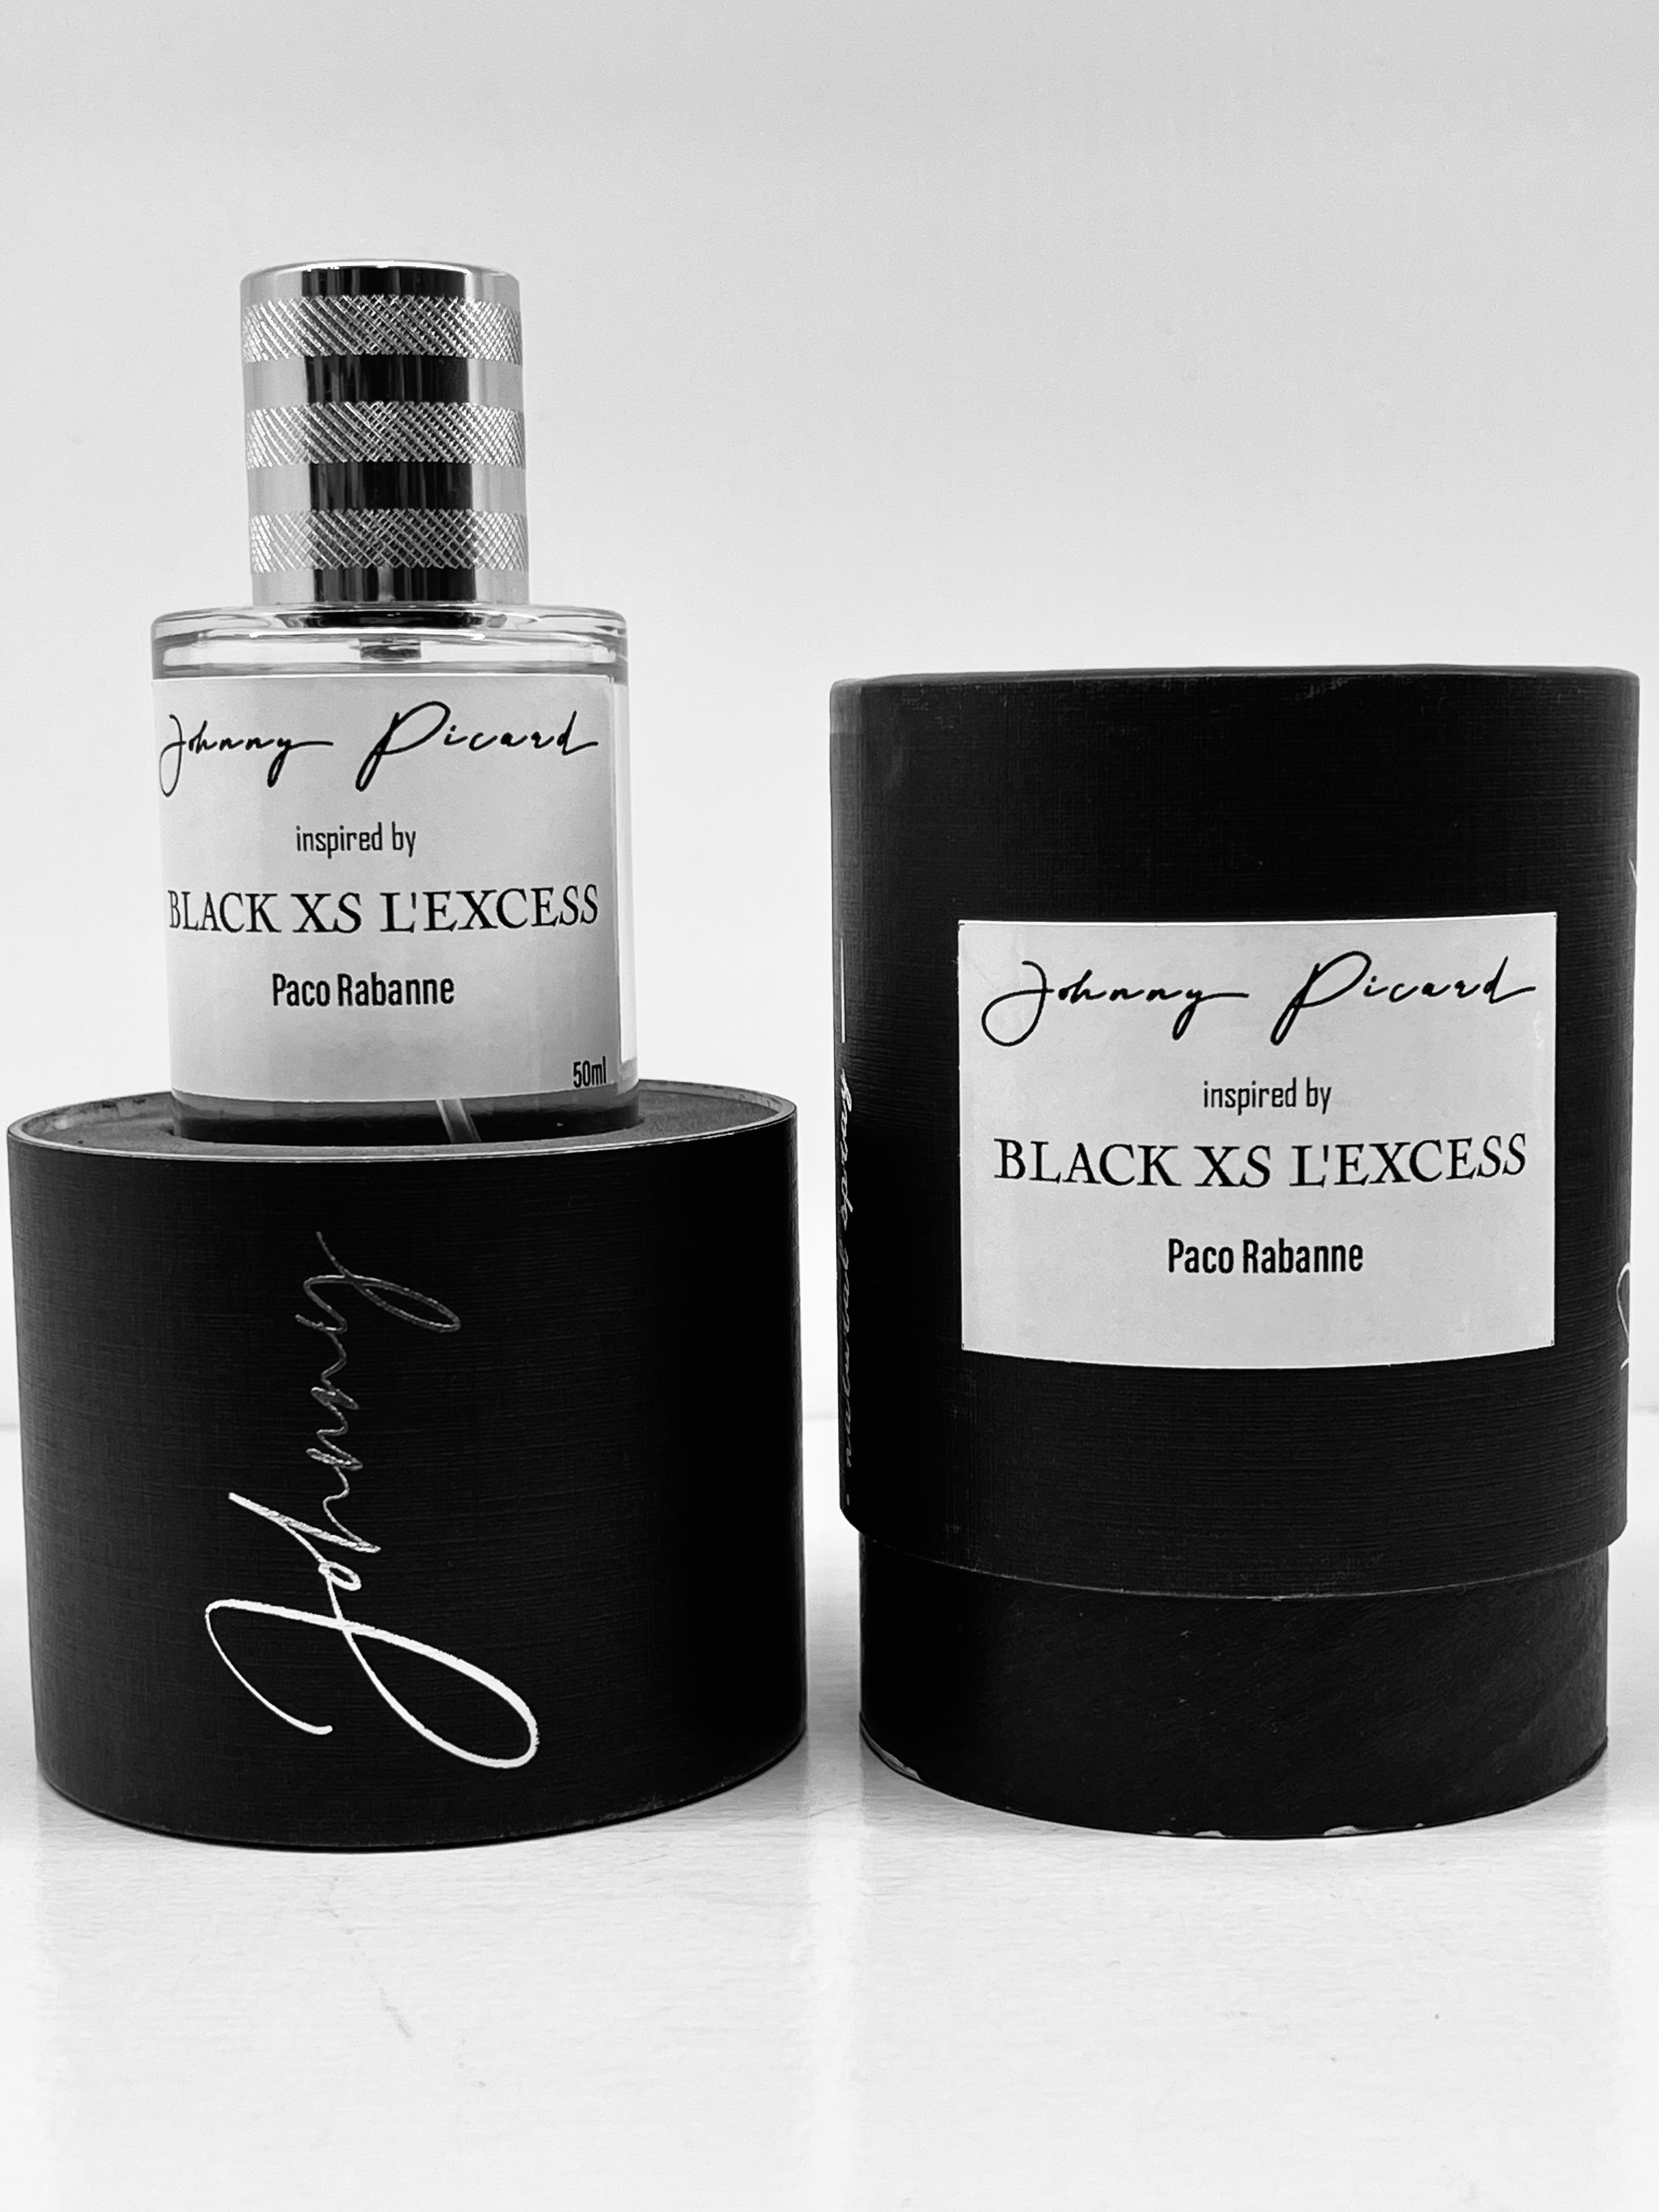 Johnny Picard Inspired By Black Xs L'excess  PACO RABANNE